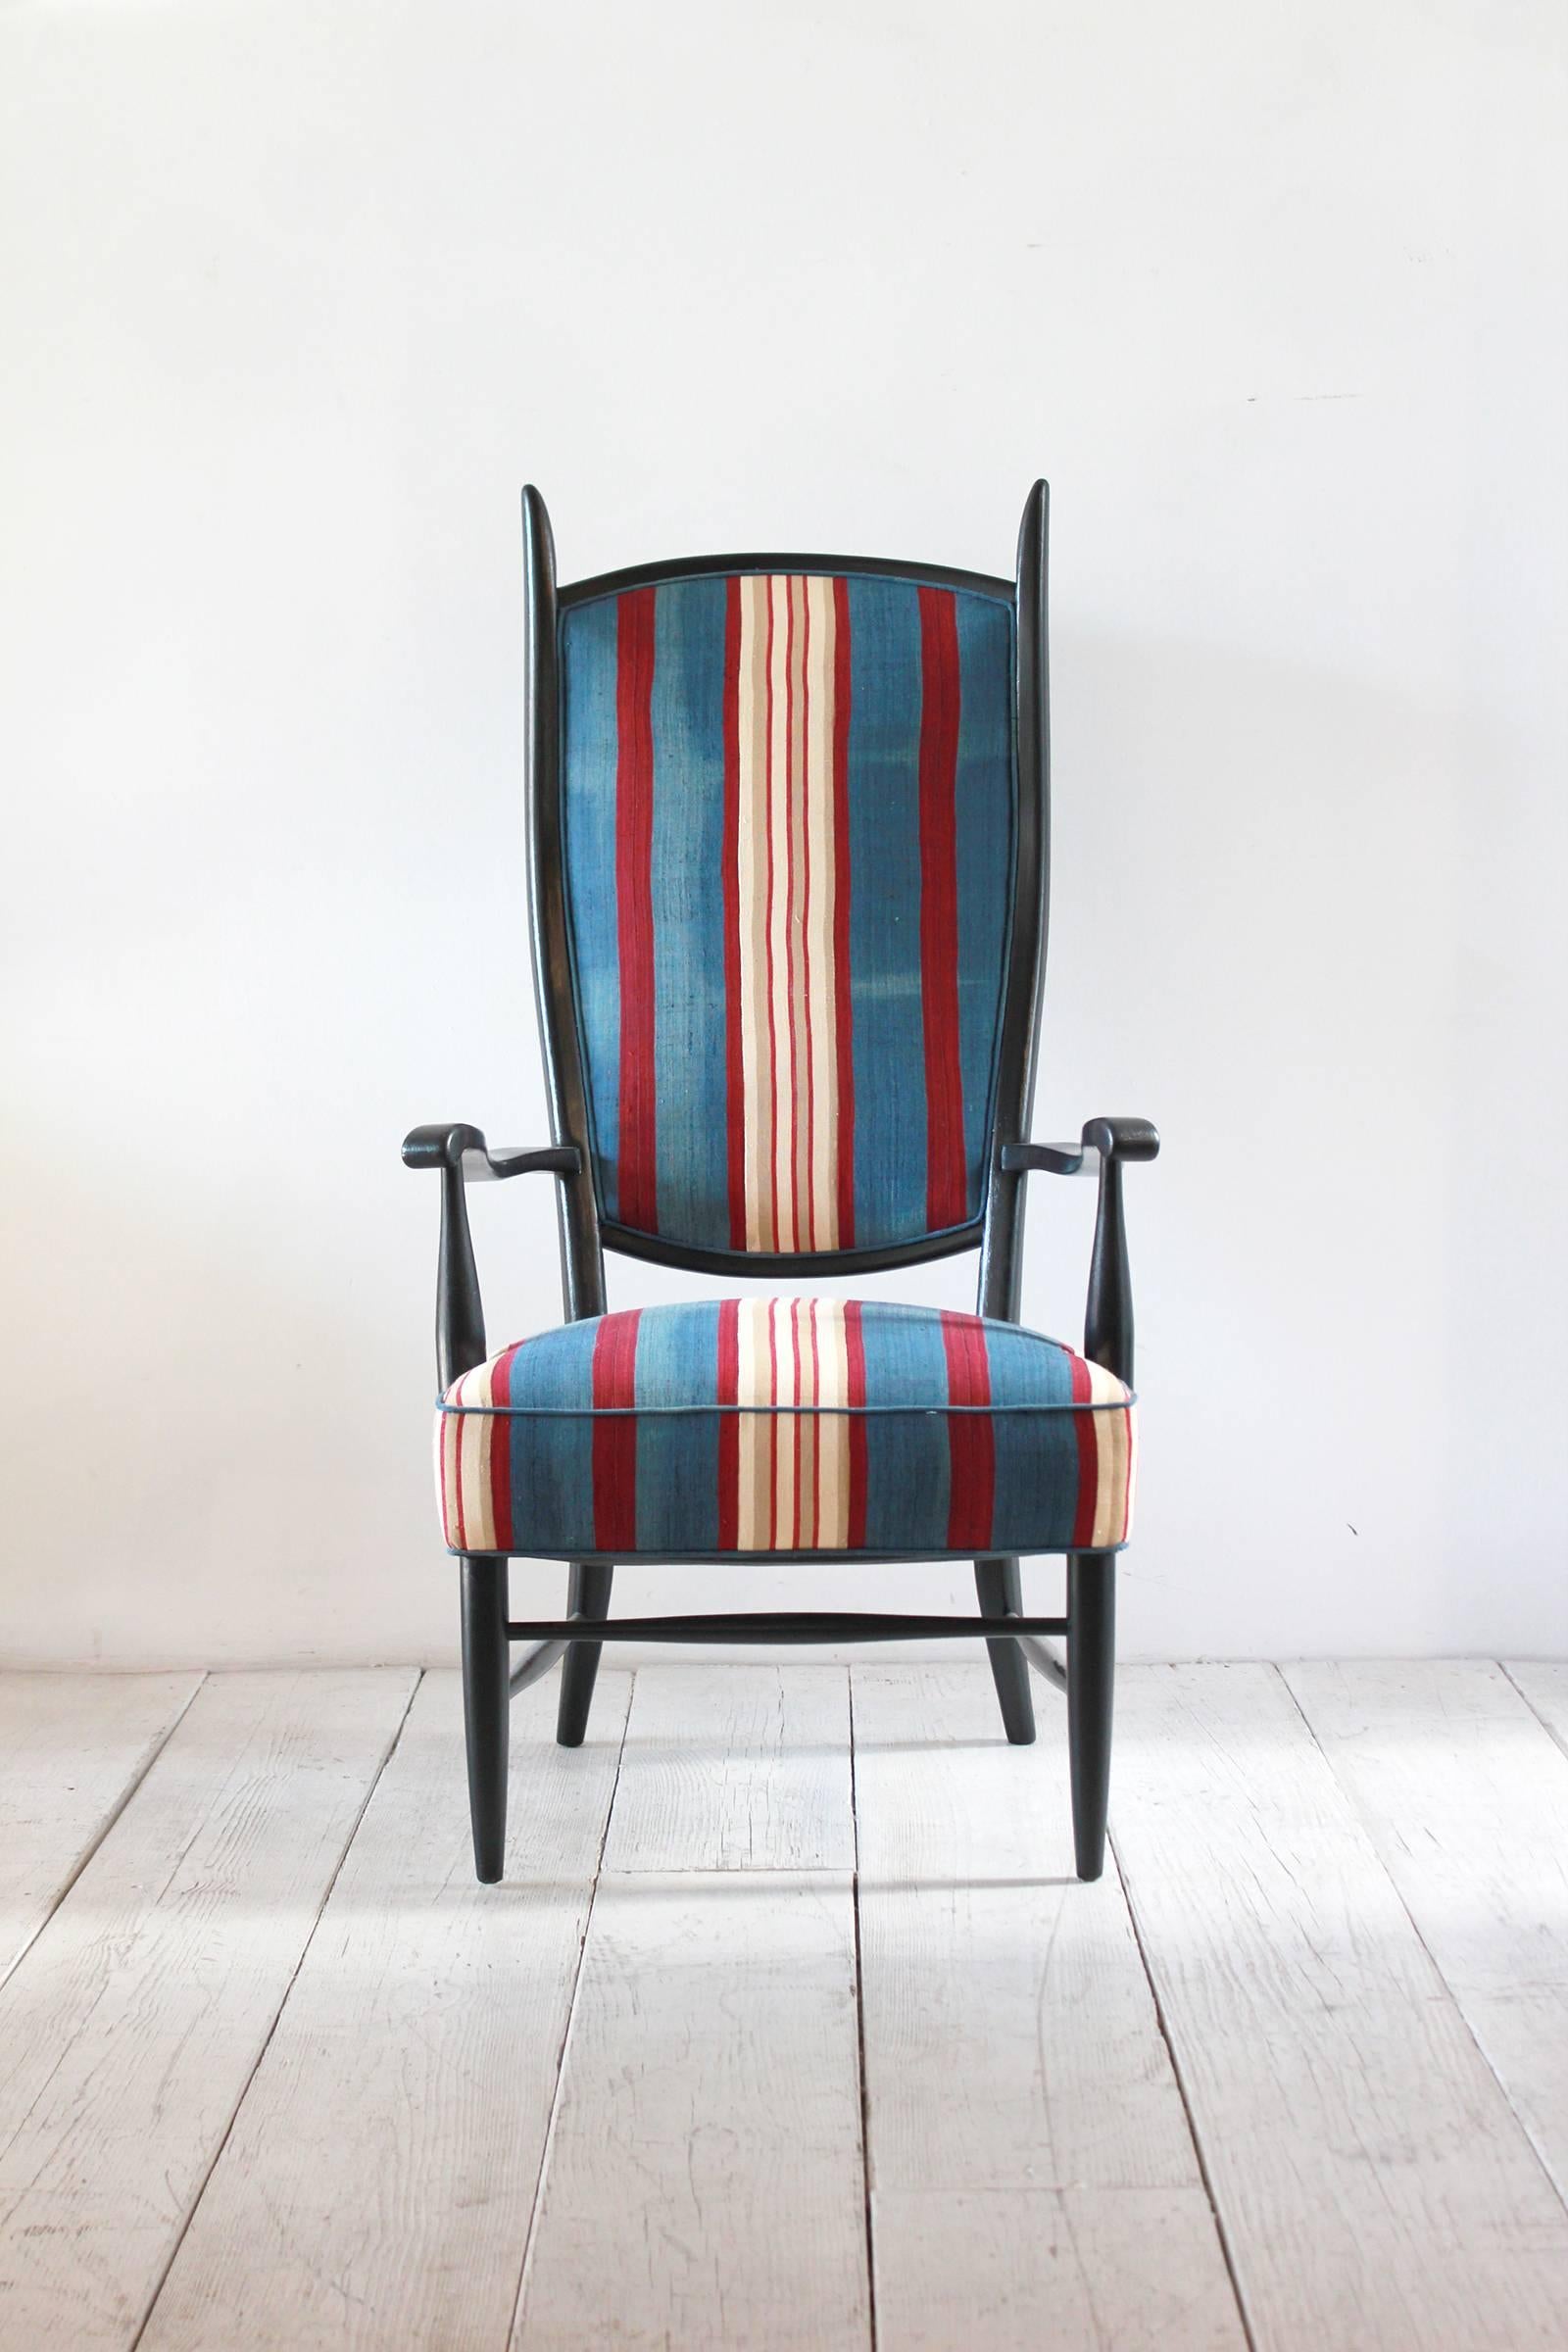 Black painted Spanish high back chair upholstered in vintage striped African fabric.